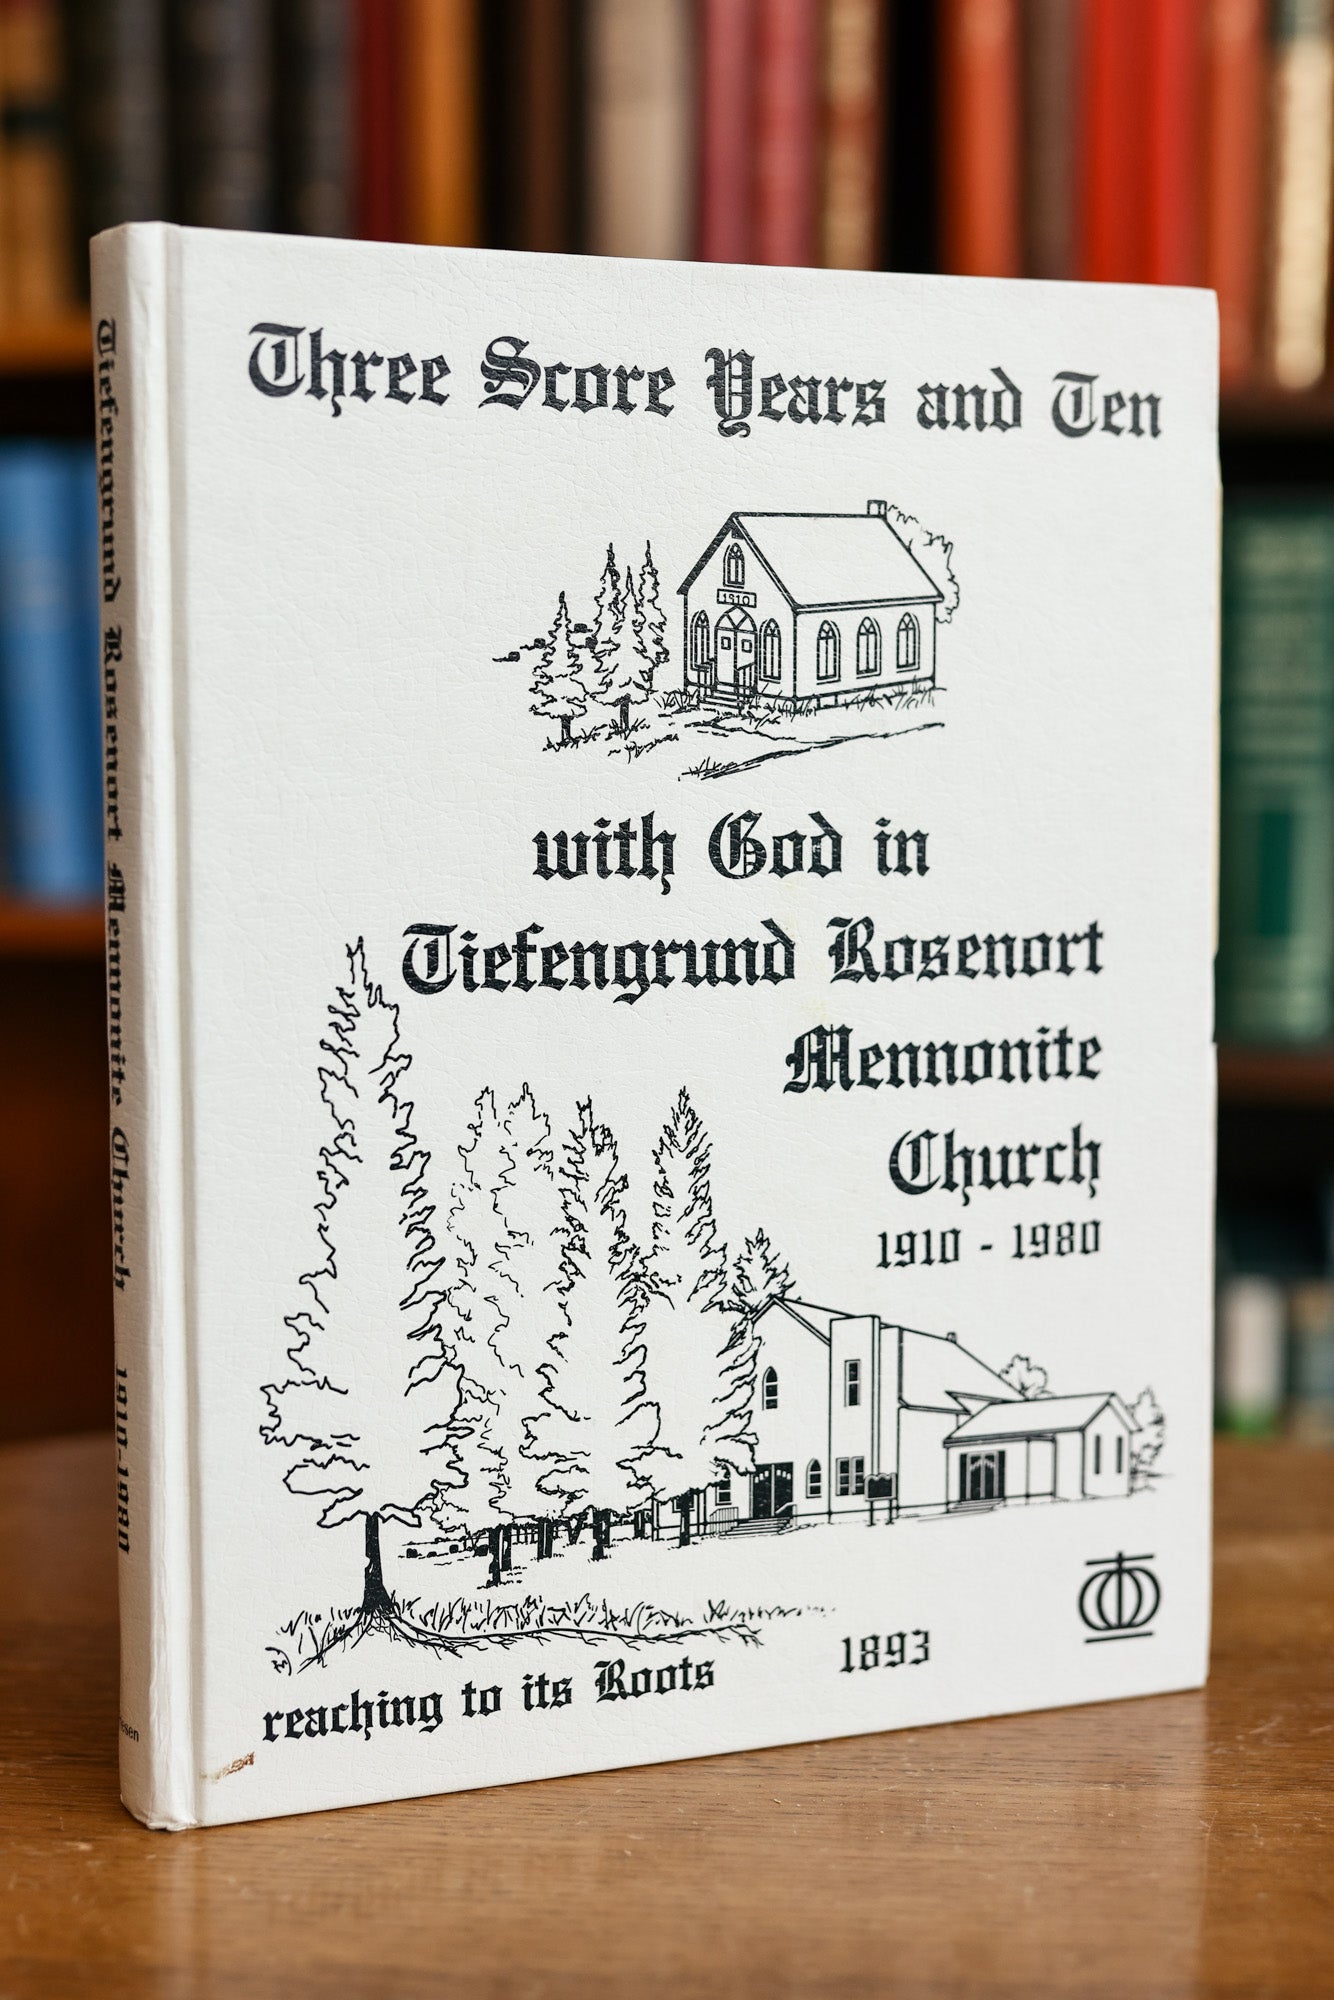 [Tiefengrund Mennonite Church]; Cornelius J. Dyck (Fwd.) - Three Score Years and Ten with God in Tiefengrund Rosenort Mennonite Church 1910-1980; Reaching to Its Roots 1893